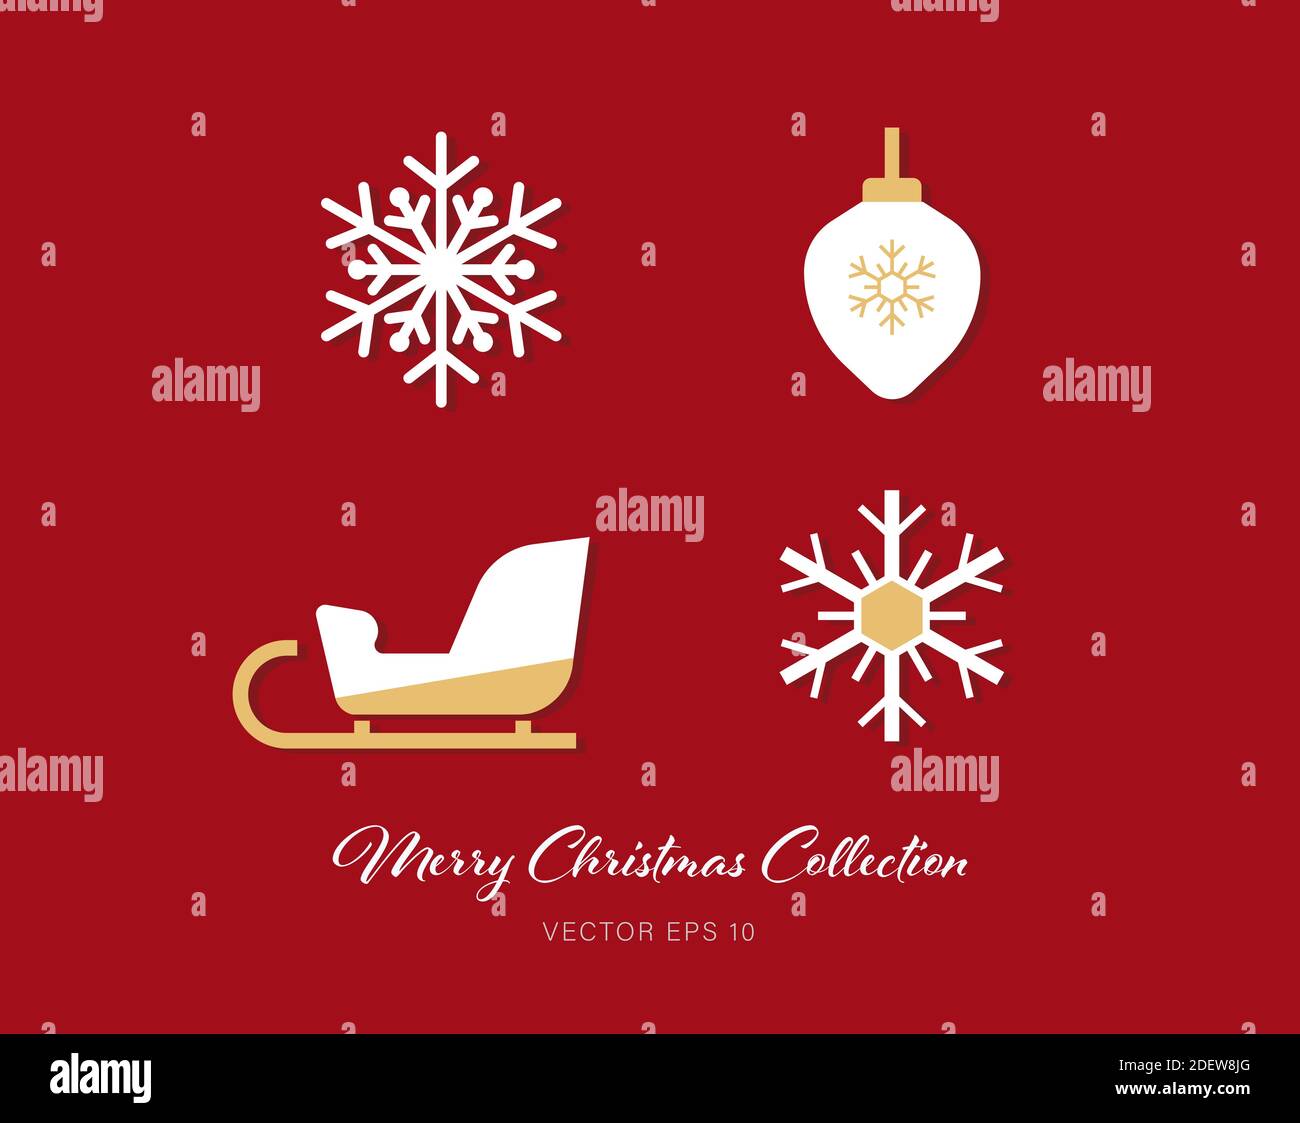 Beautiful white and gold theme Christmas flat icon set of 4 designs on red background Stock Vector